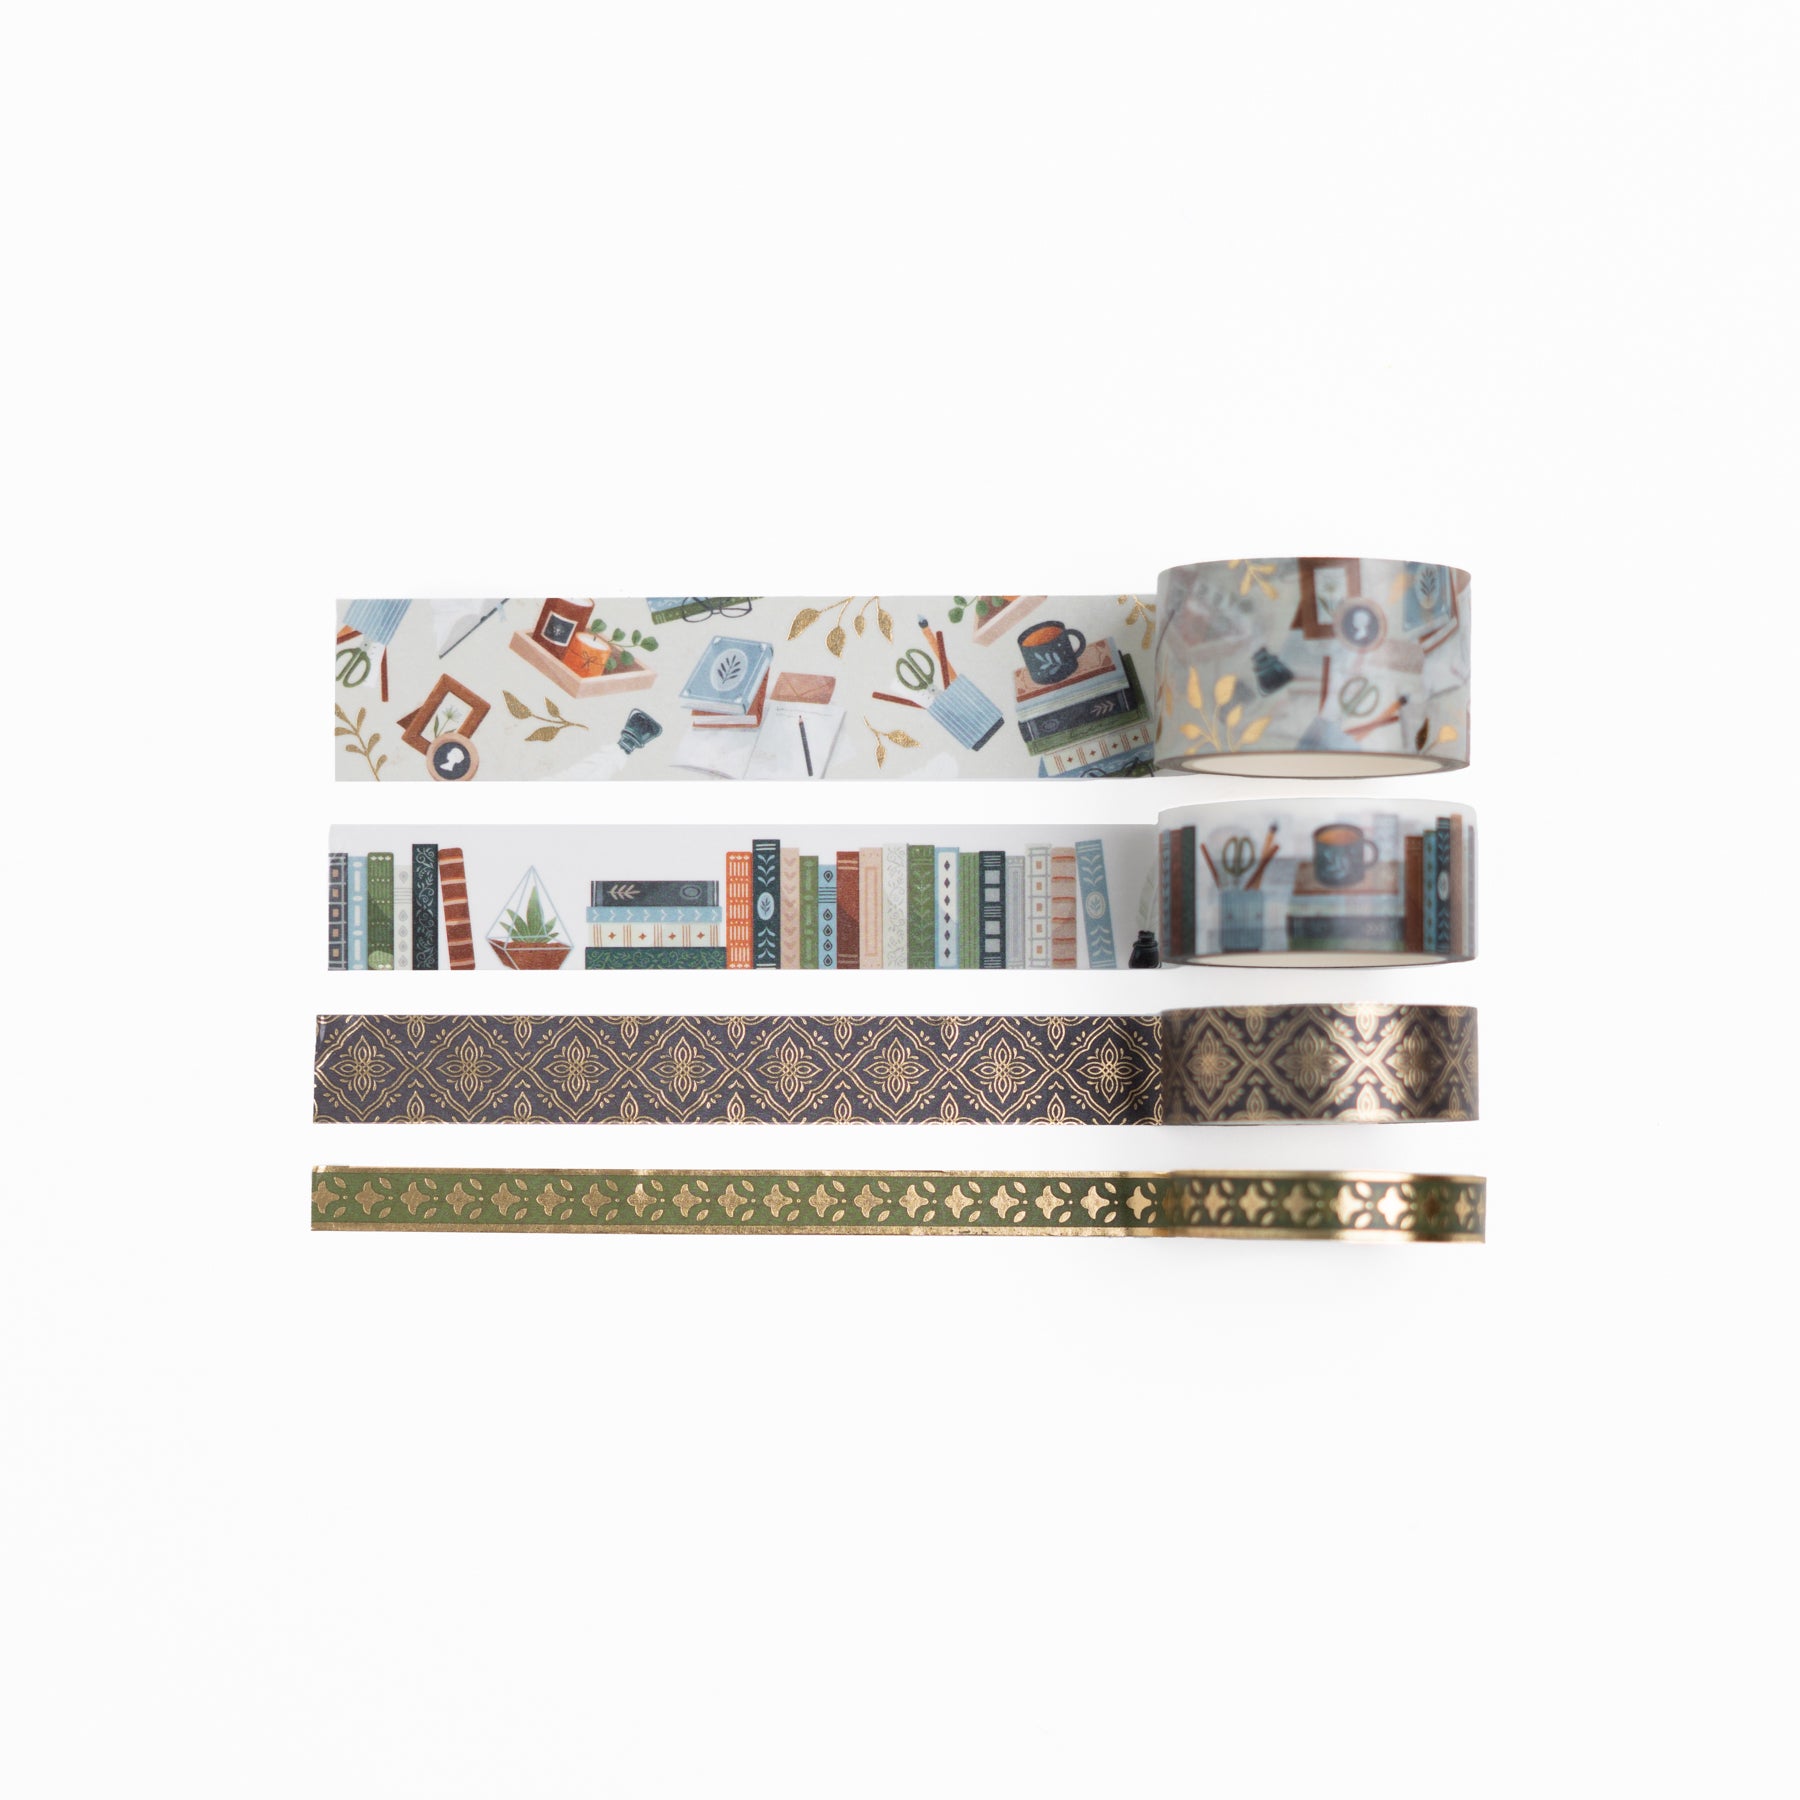 Everyday Bookish Washi Tape - Archer and Olive